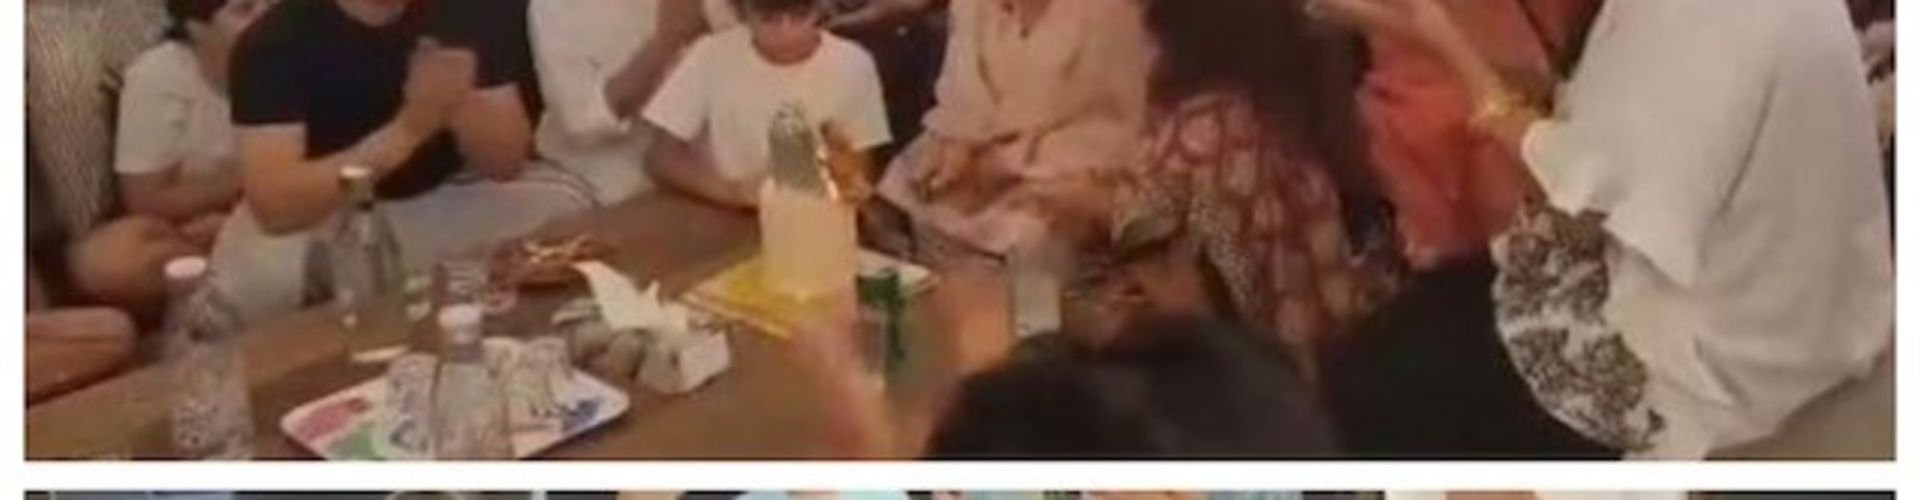 Aamir Khan Celebrates His Mother’s Birthday With Family